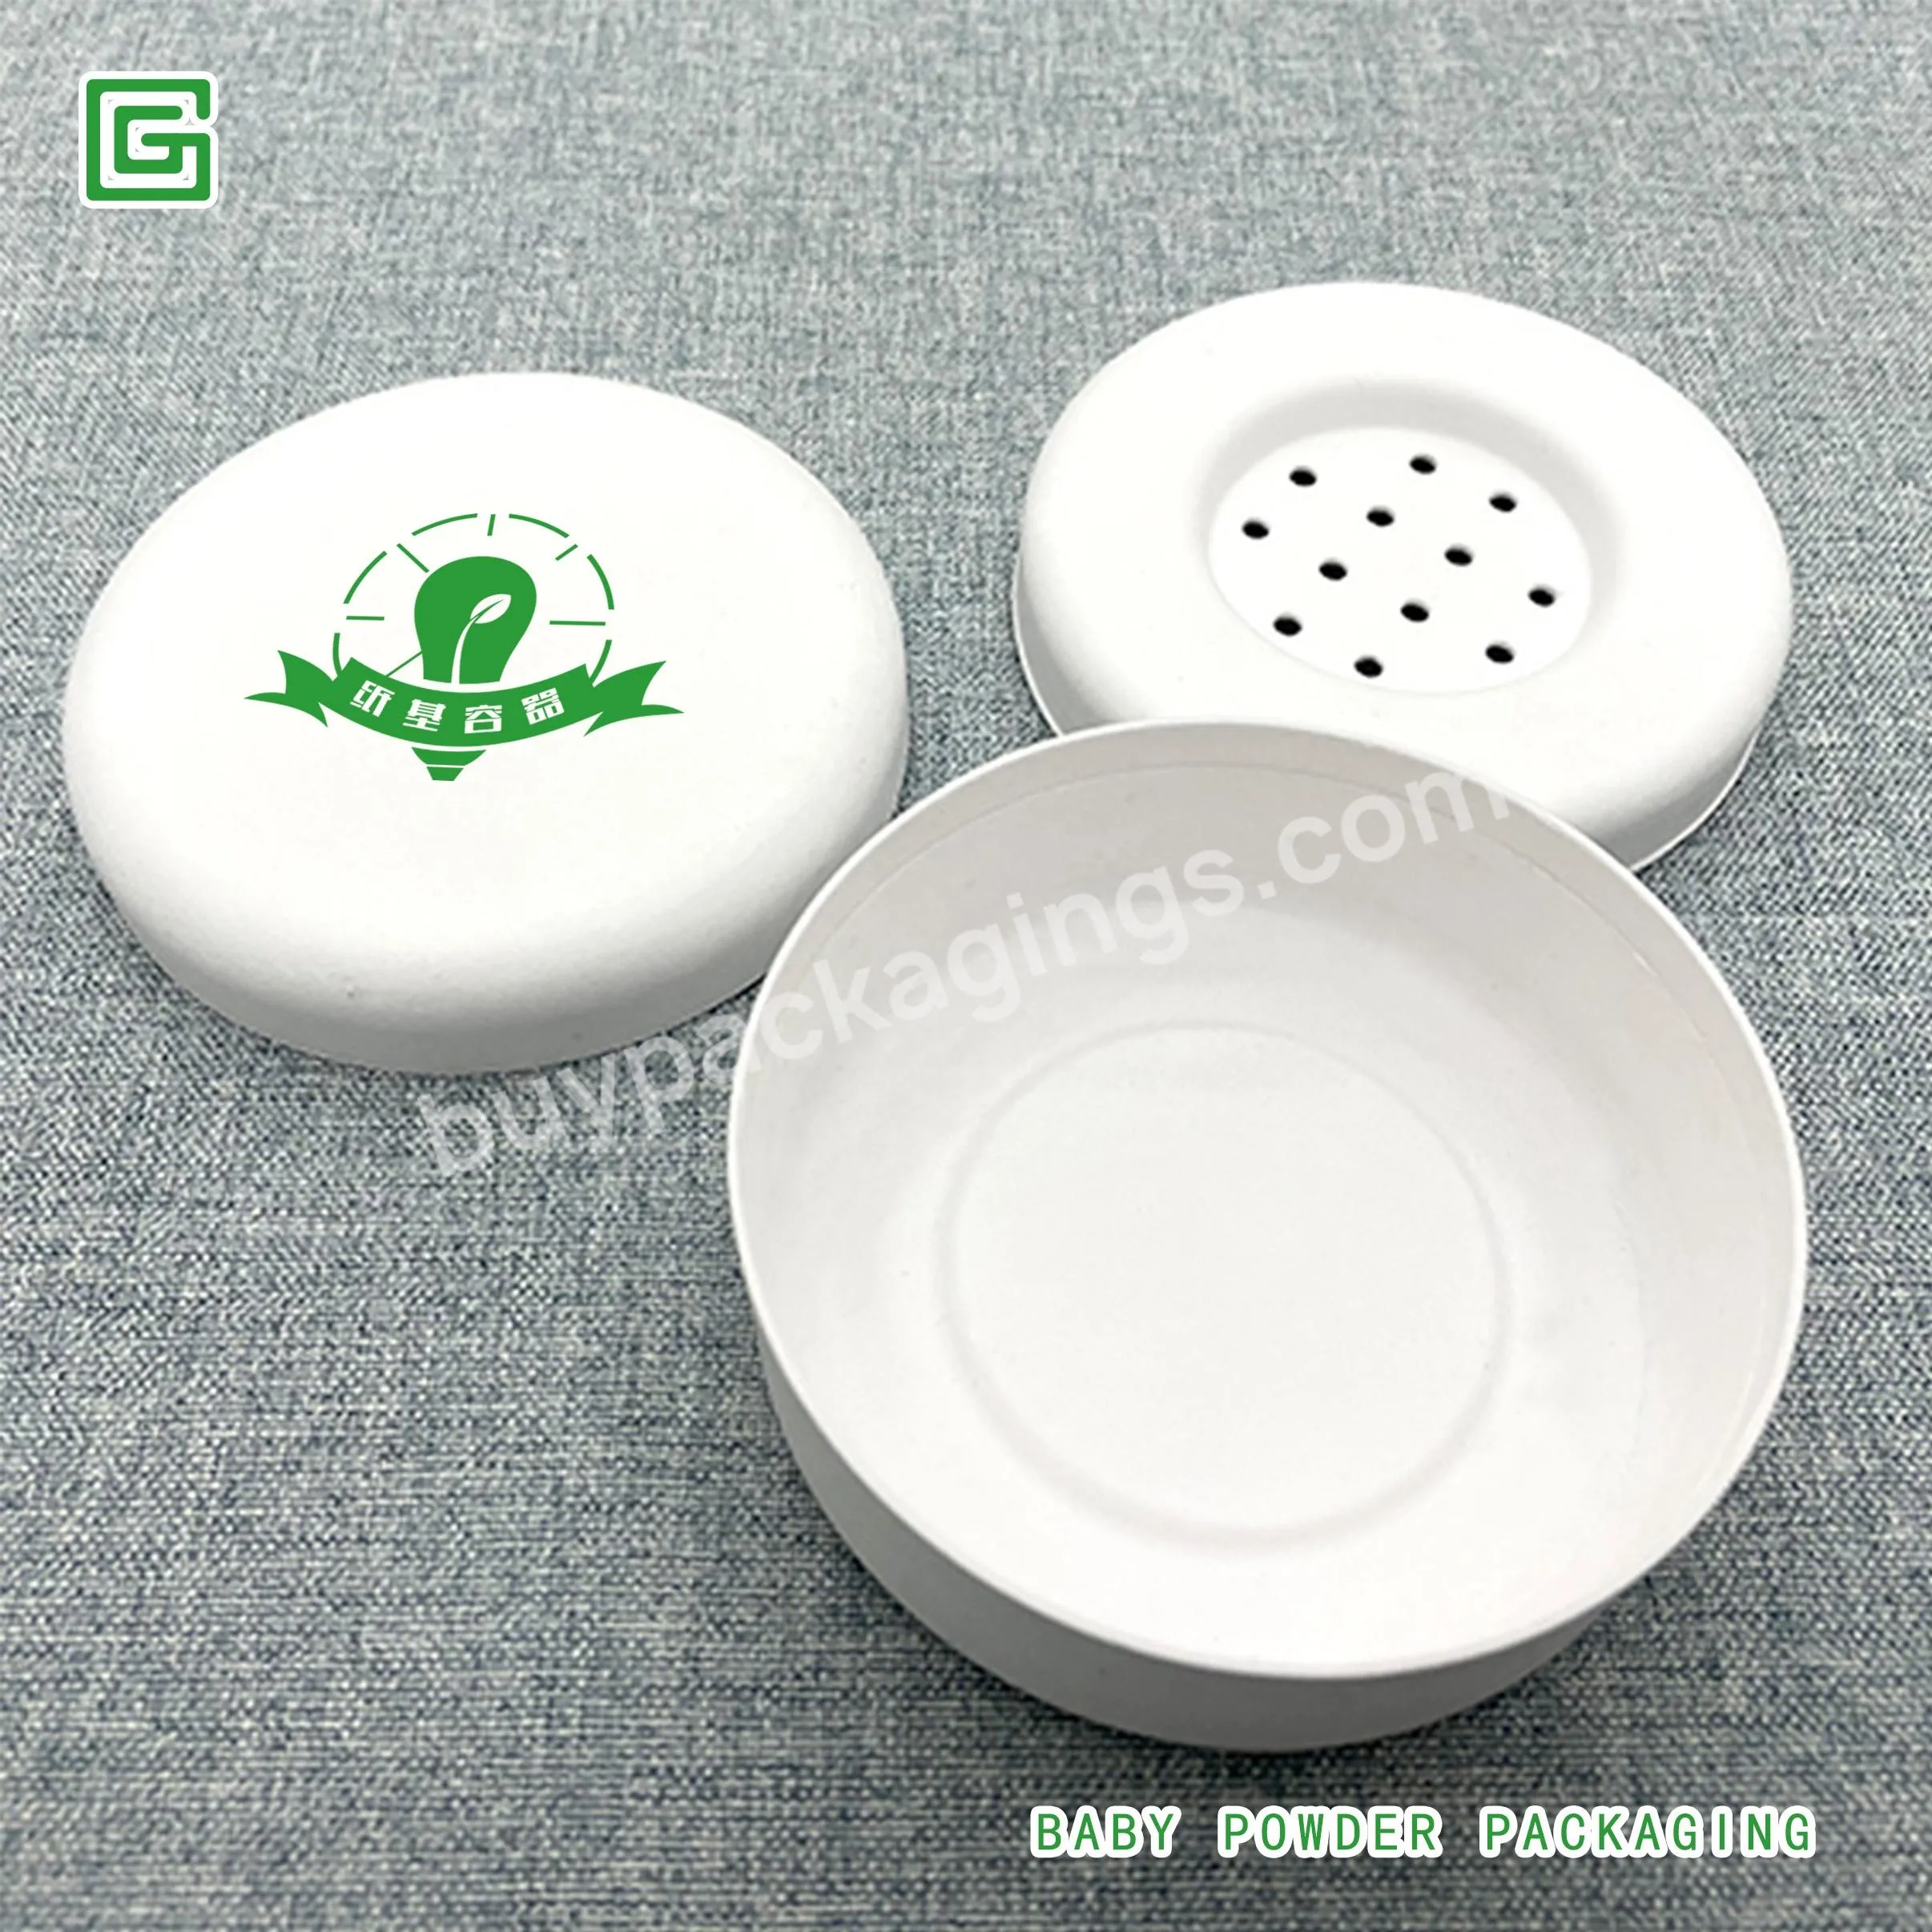 China Design Wholesale Custom Recyclable Baby Powder Molded Pulp Packaging For Personal Care - Buy Paper Molding Pulp Packaging,Molded Pulp Packaging Recyclable,Molded Paper Pulp Packaging.